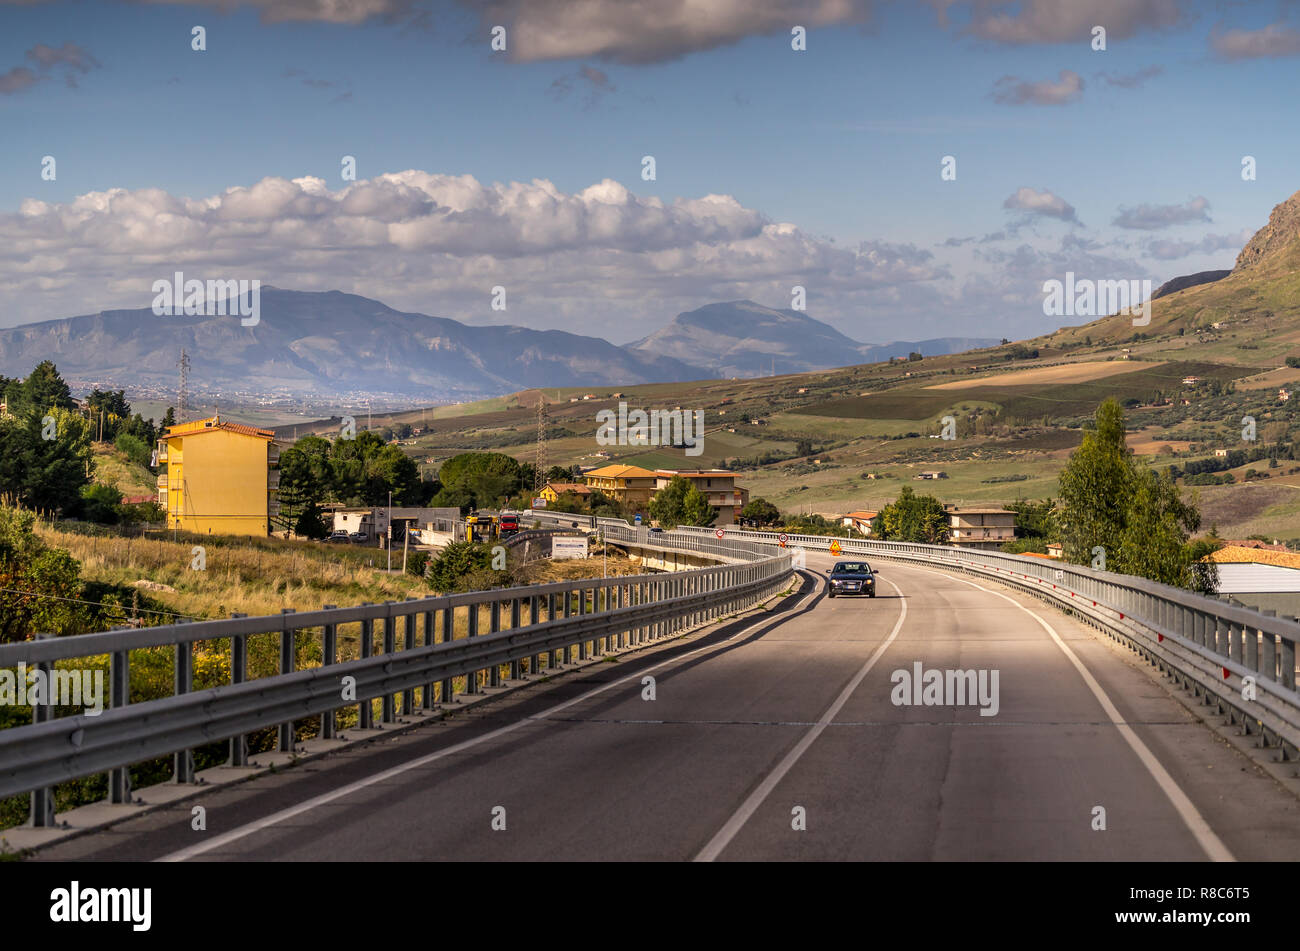 Travel in Italy - Panorama view of highways, houses, mountains, and agrarian fields near Agrigento, Sicily Italy Stock Photo